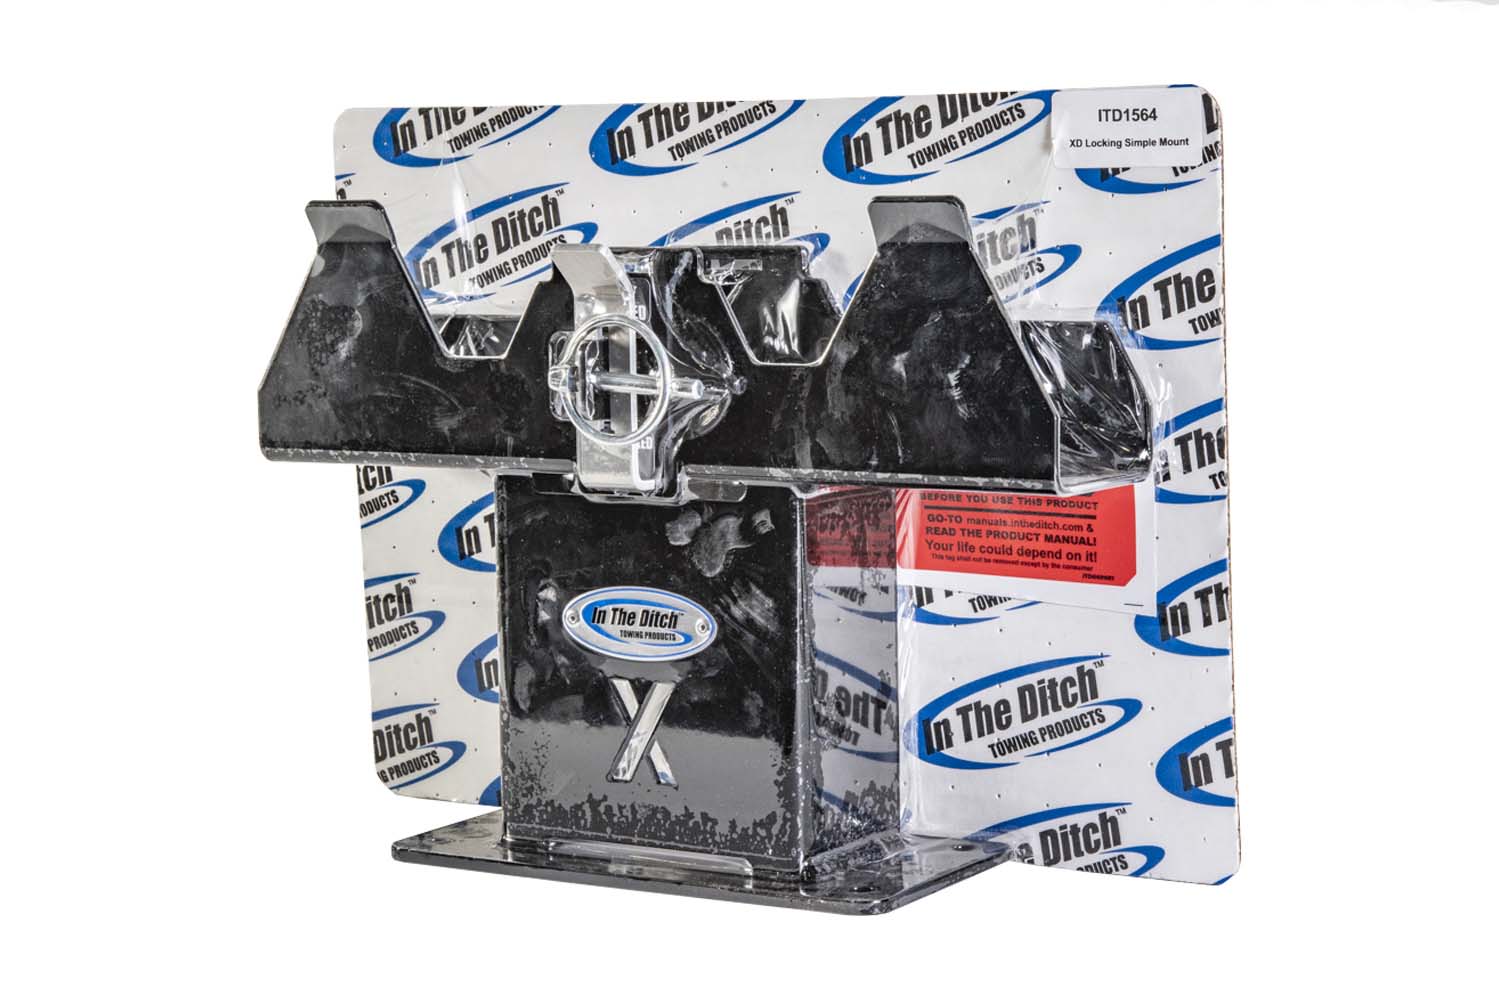 19-1/8 Tunnel Box Divider - In The Ditch Towing Products : In The Ditch  Towing Products